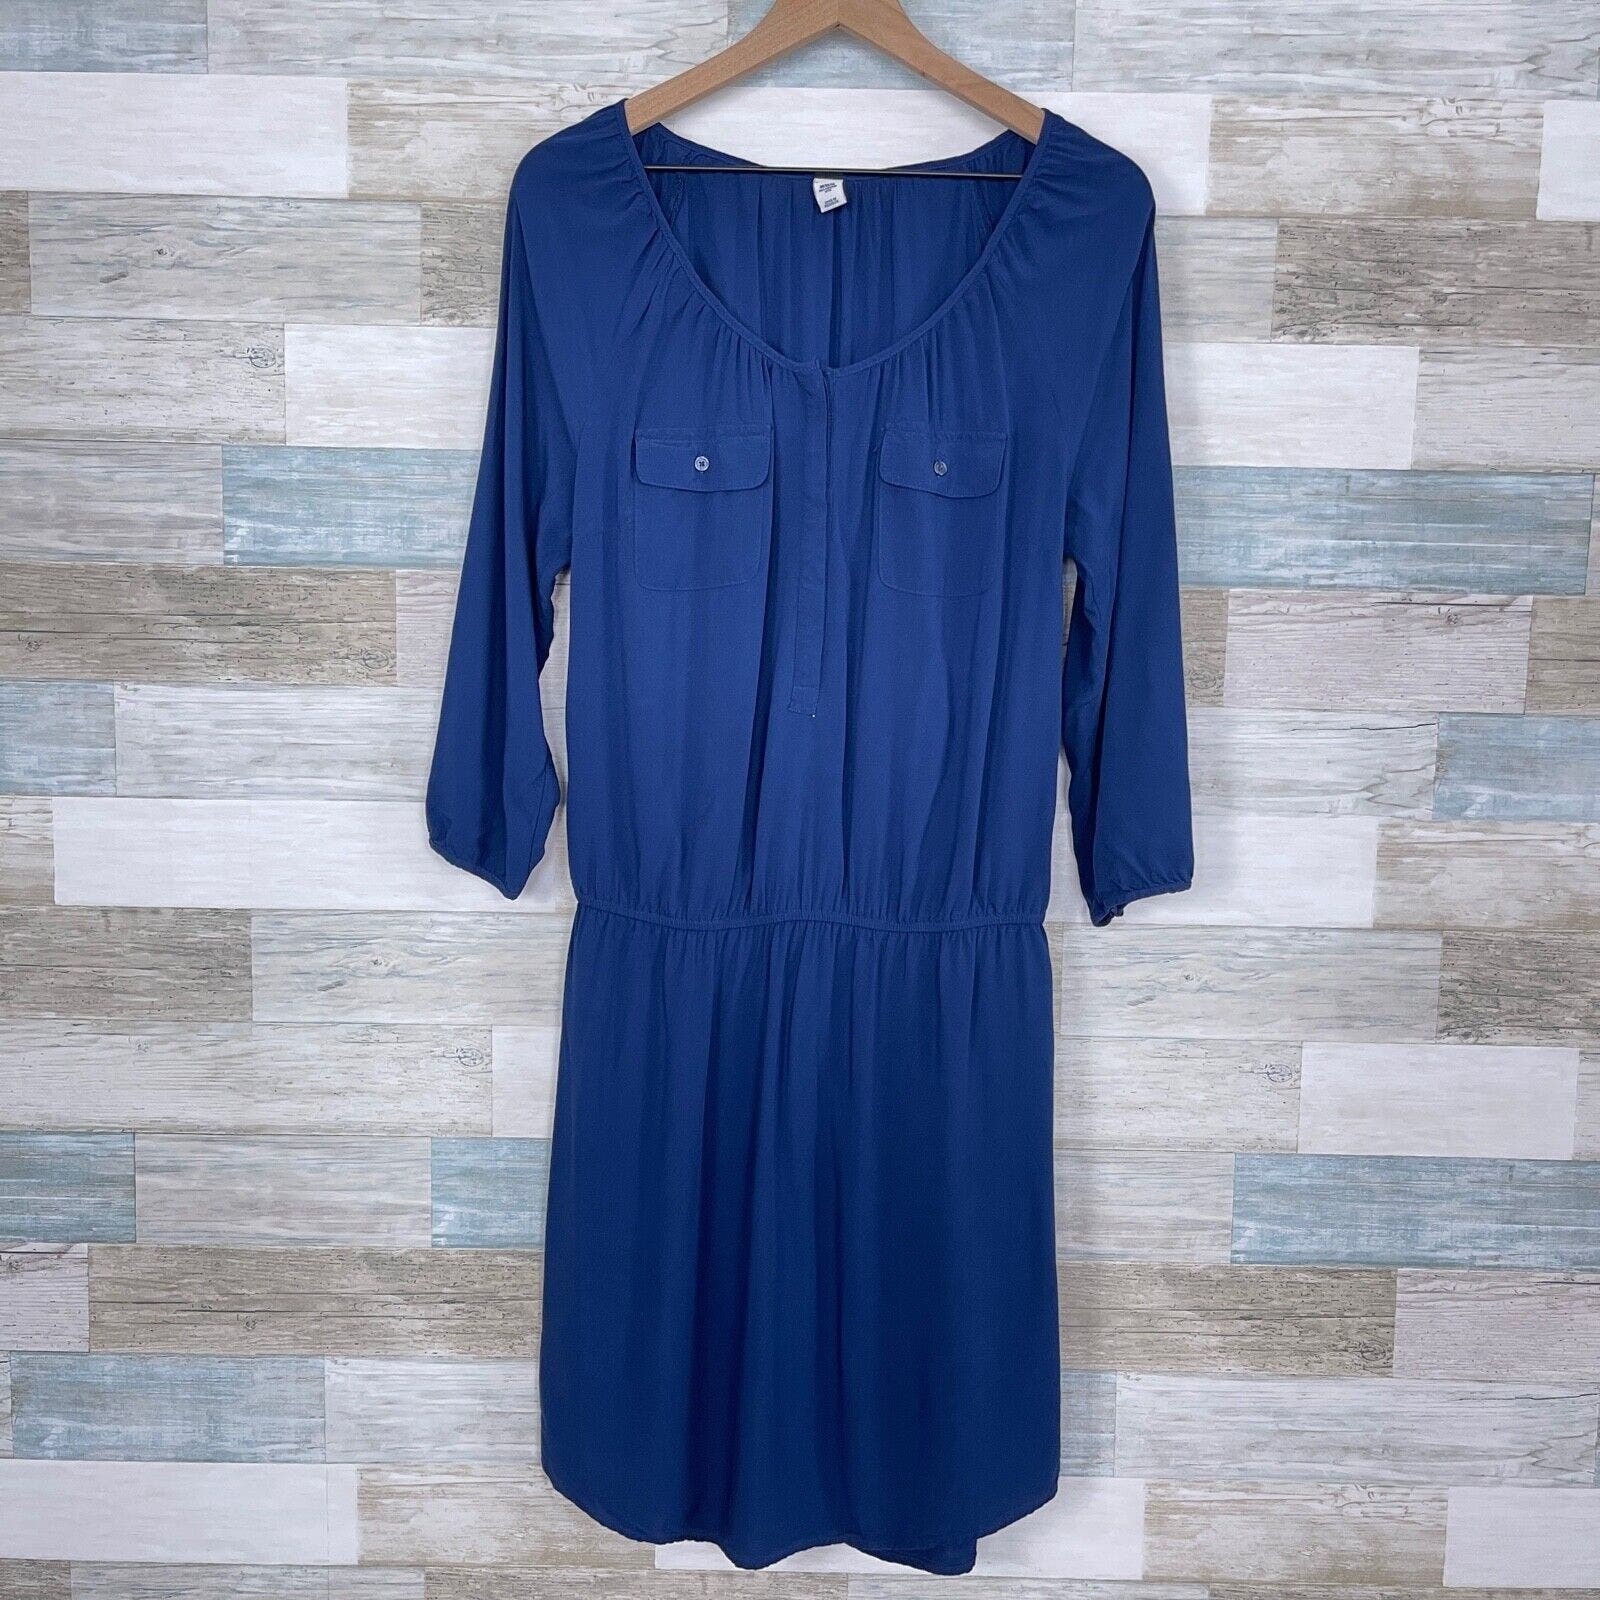 Primary image for Old Navy Modern Popover Shirt Dress Blue Cinch Waist Casual Womens Medium